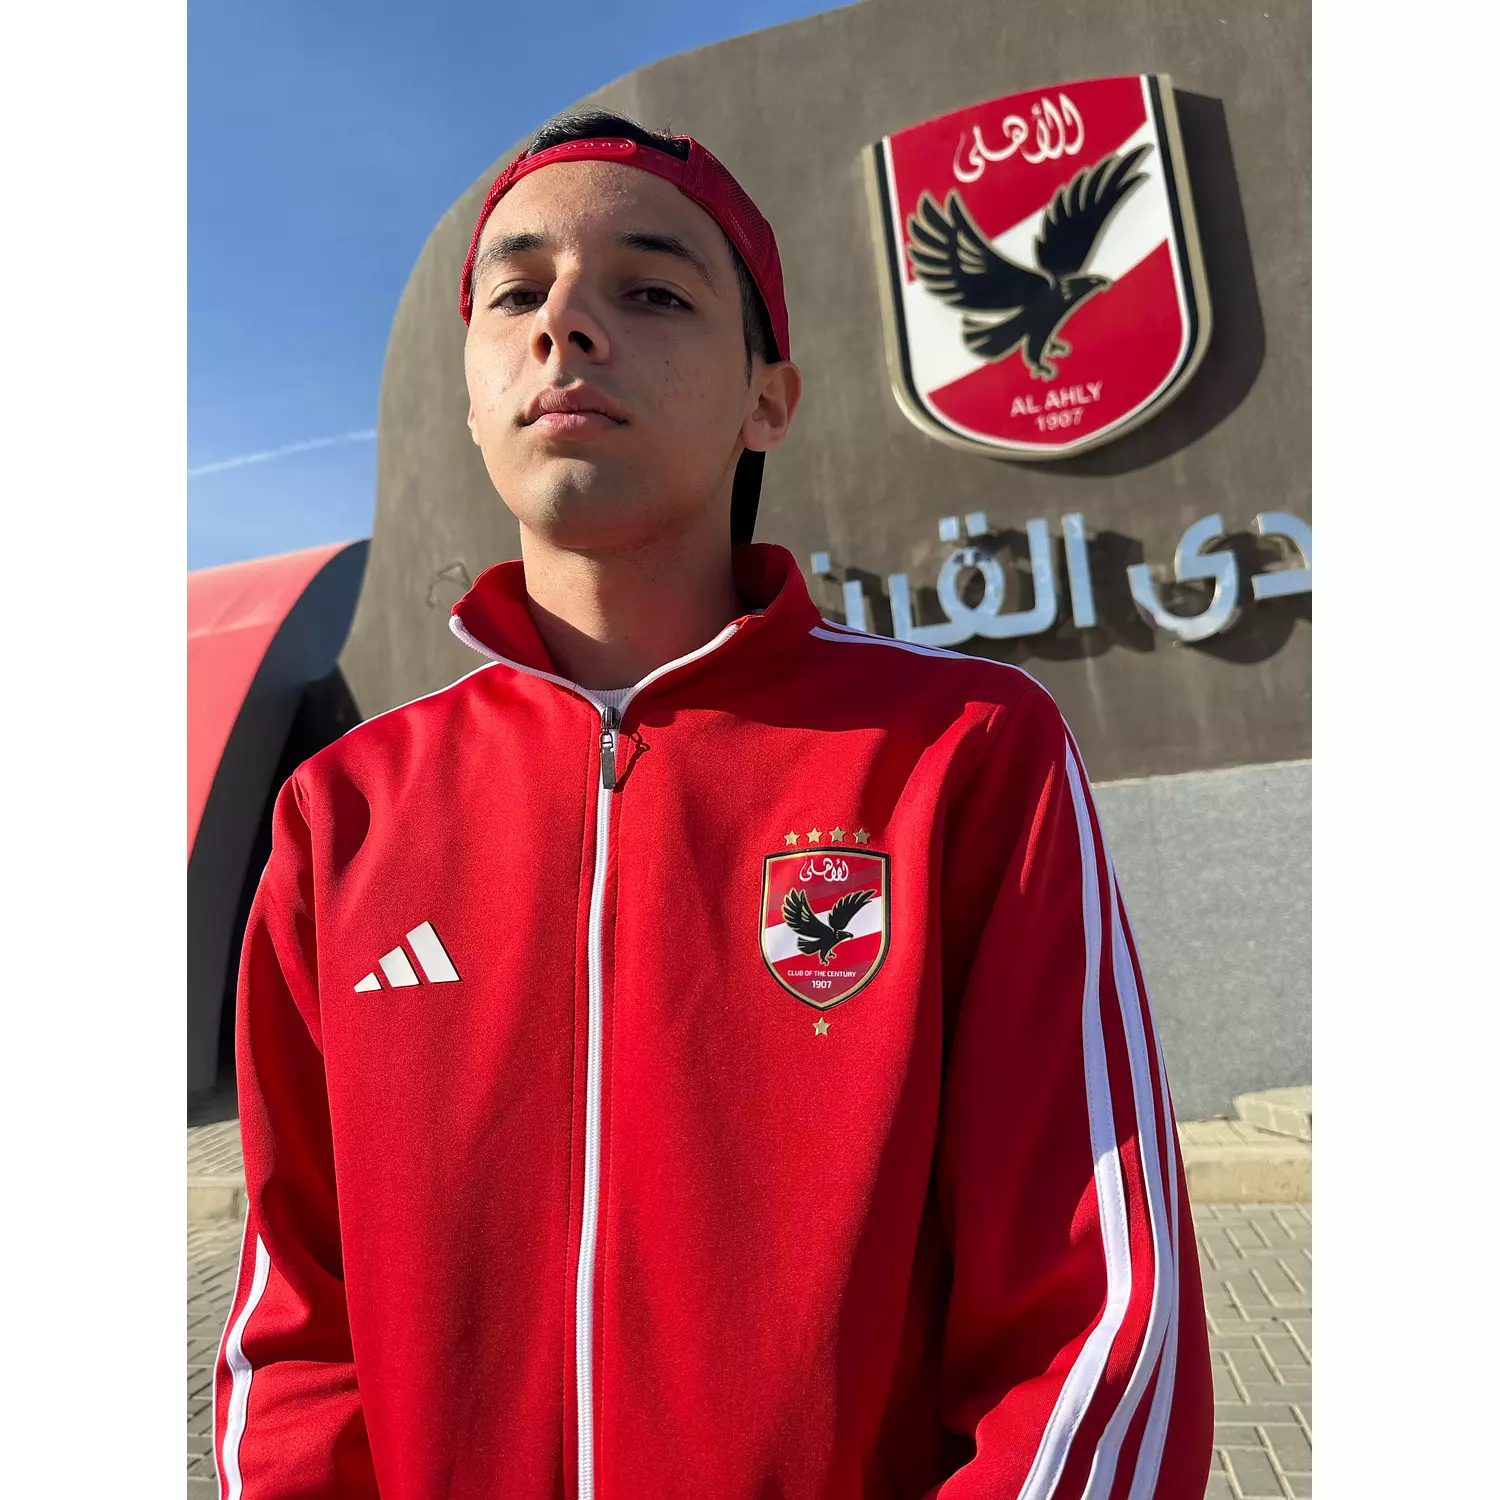 Ahly Red Sweatshirt hover image